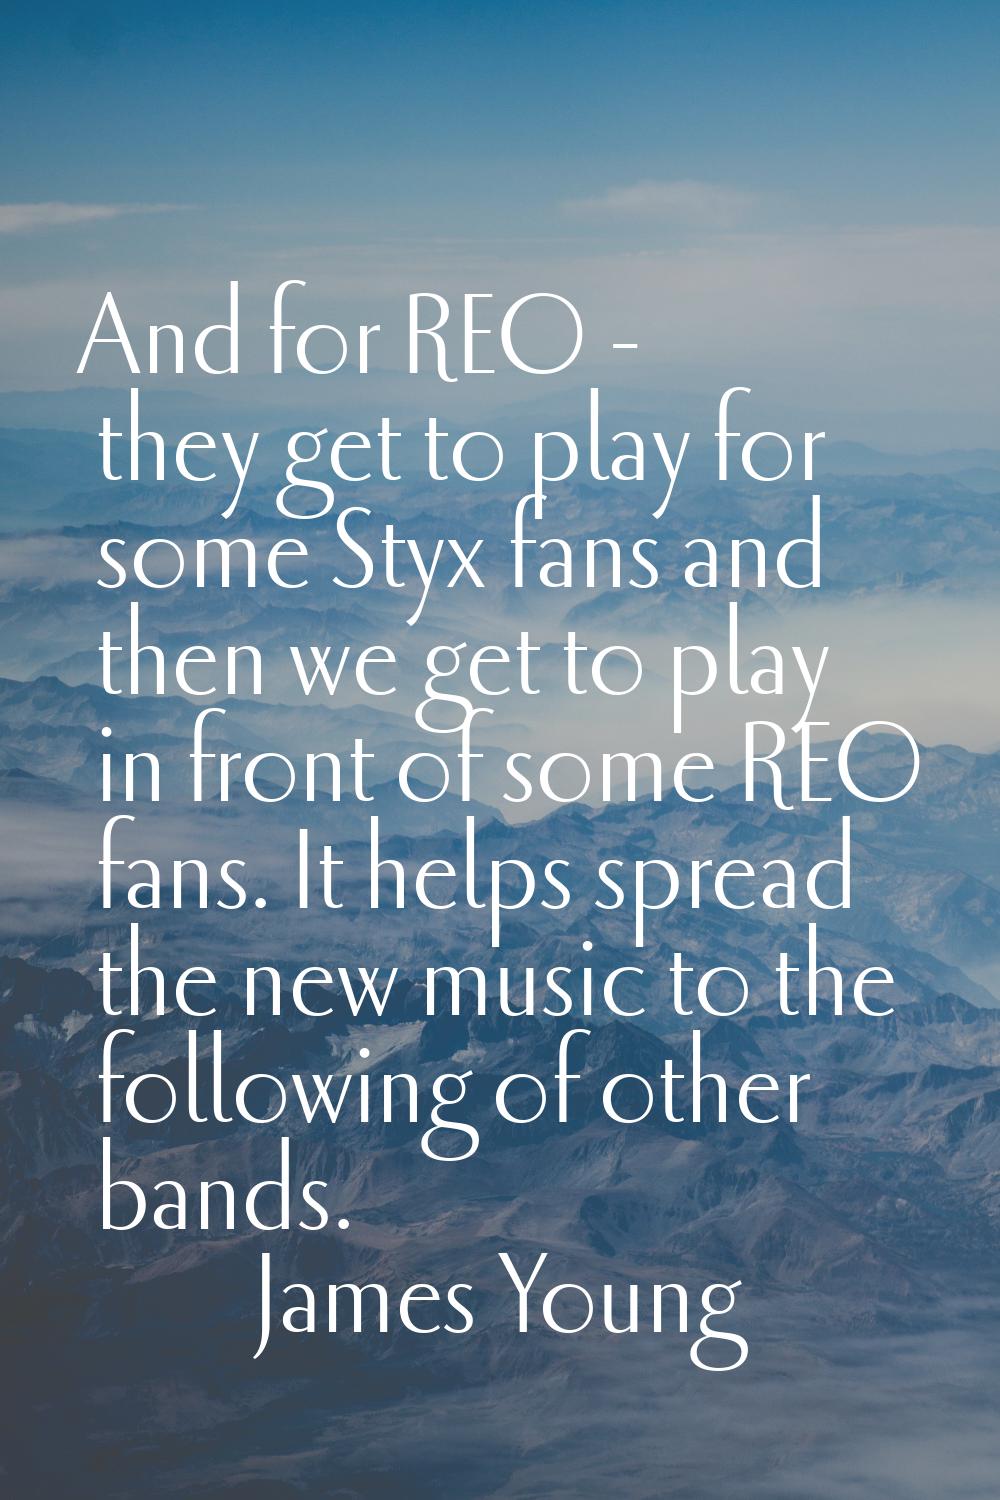 And for REO - they get to play for some Styx fans and then we get to play in front of some REO fans